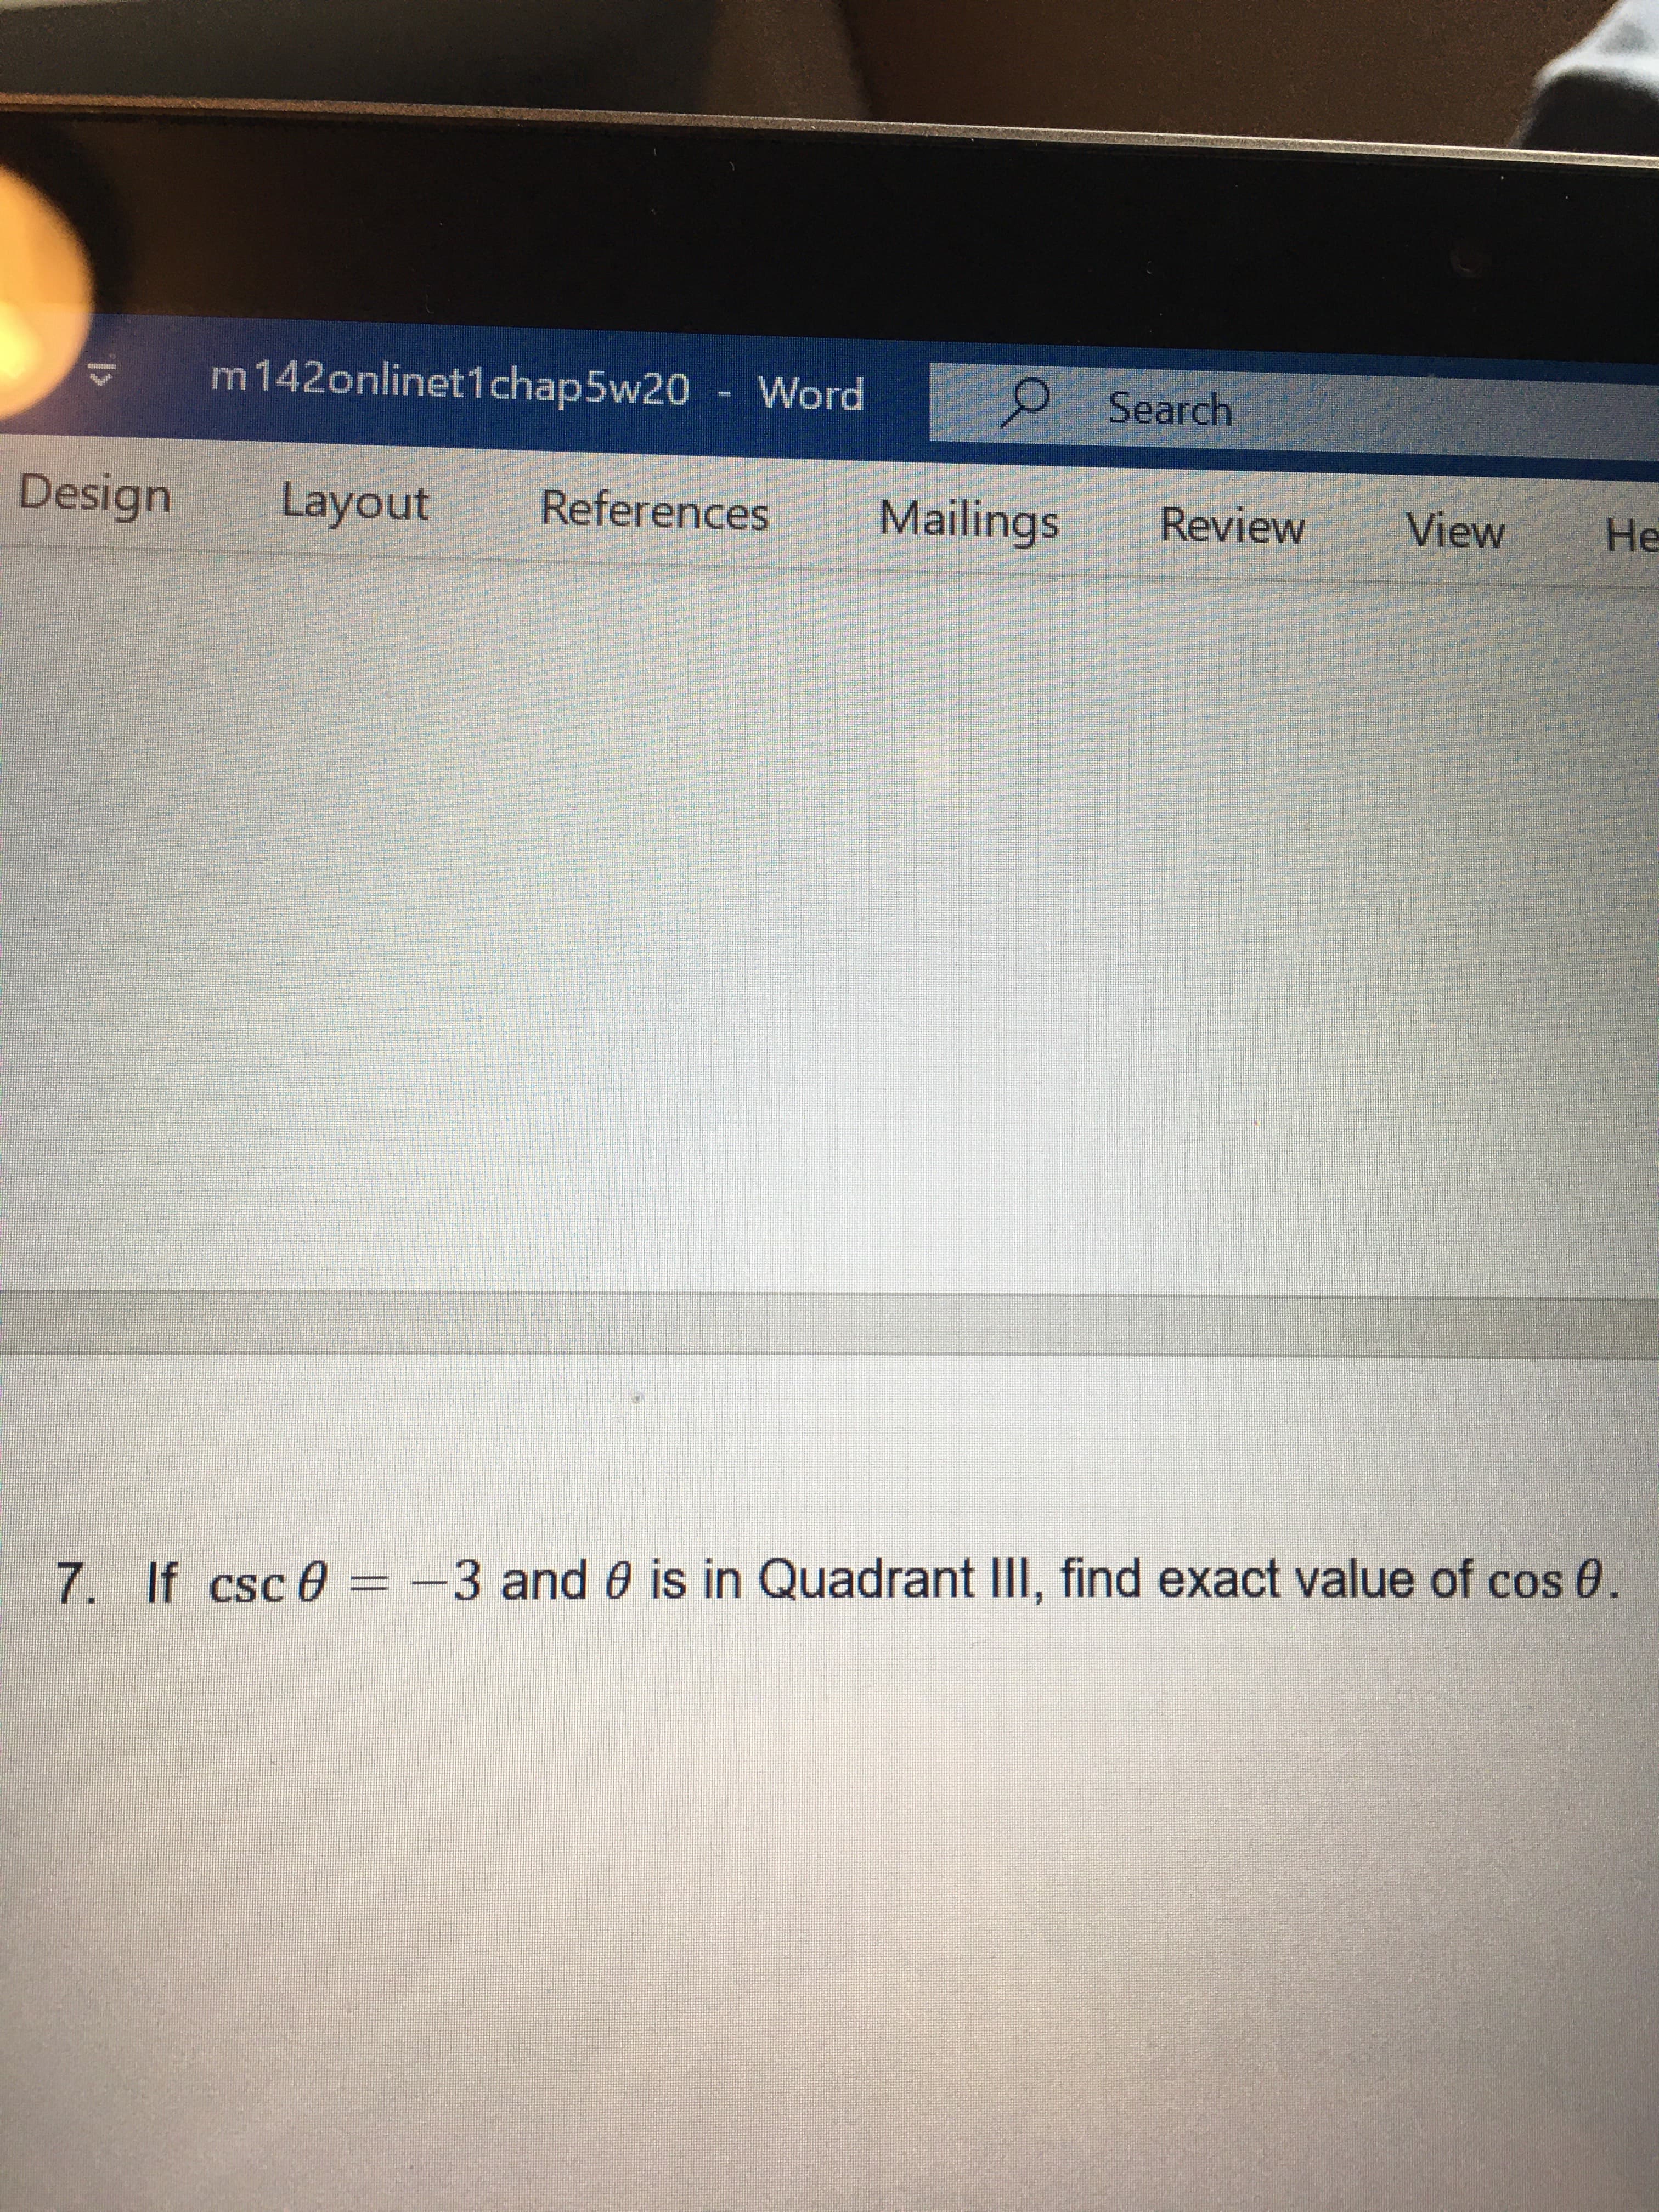 m142onlinet1chap5w20 - Word
O Search
Design
Layout
References
Mailings Review
View
He
7. If csc e = -3 and 0 is in Quadrant Ill, find exact value of cos 0.
